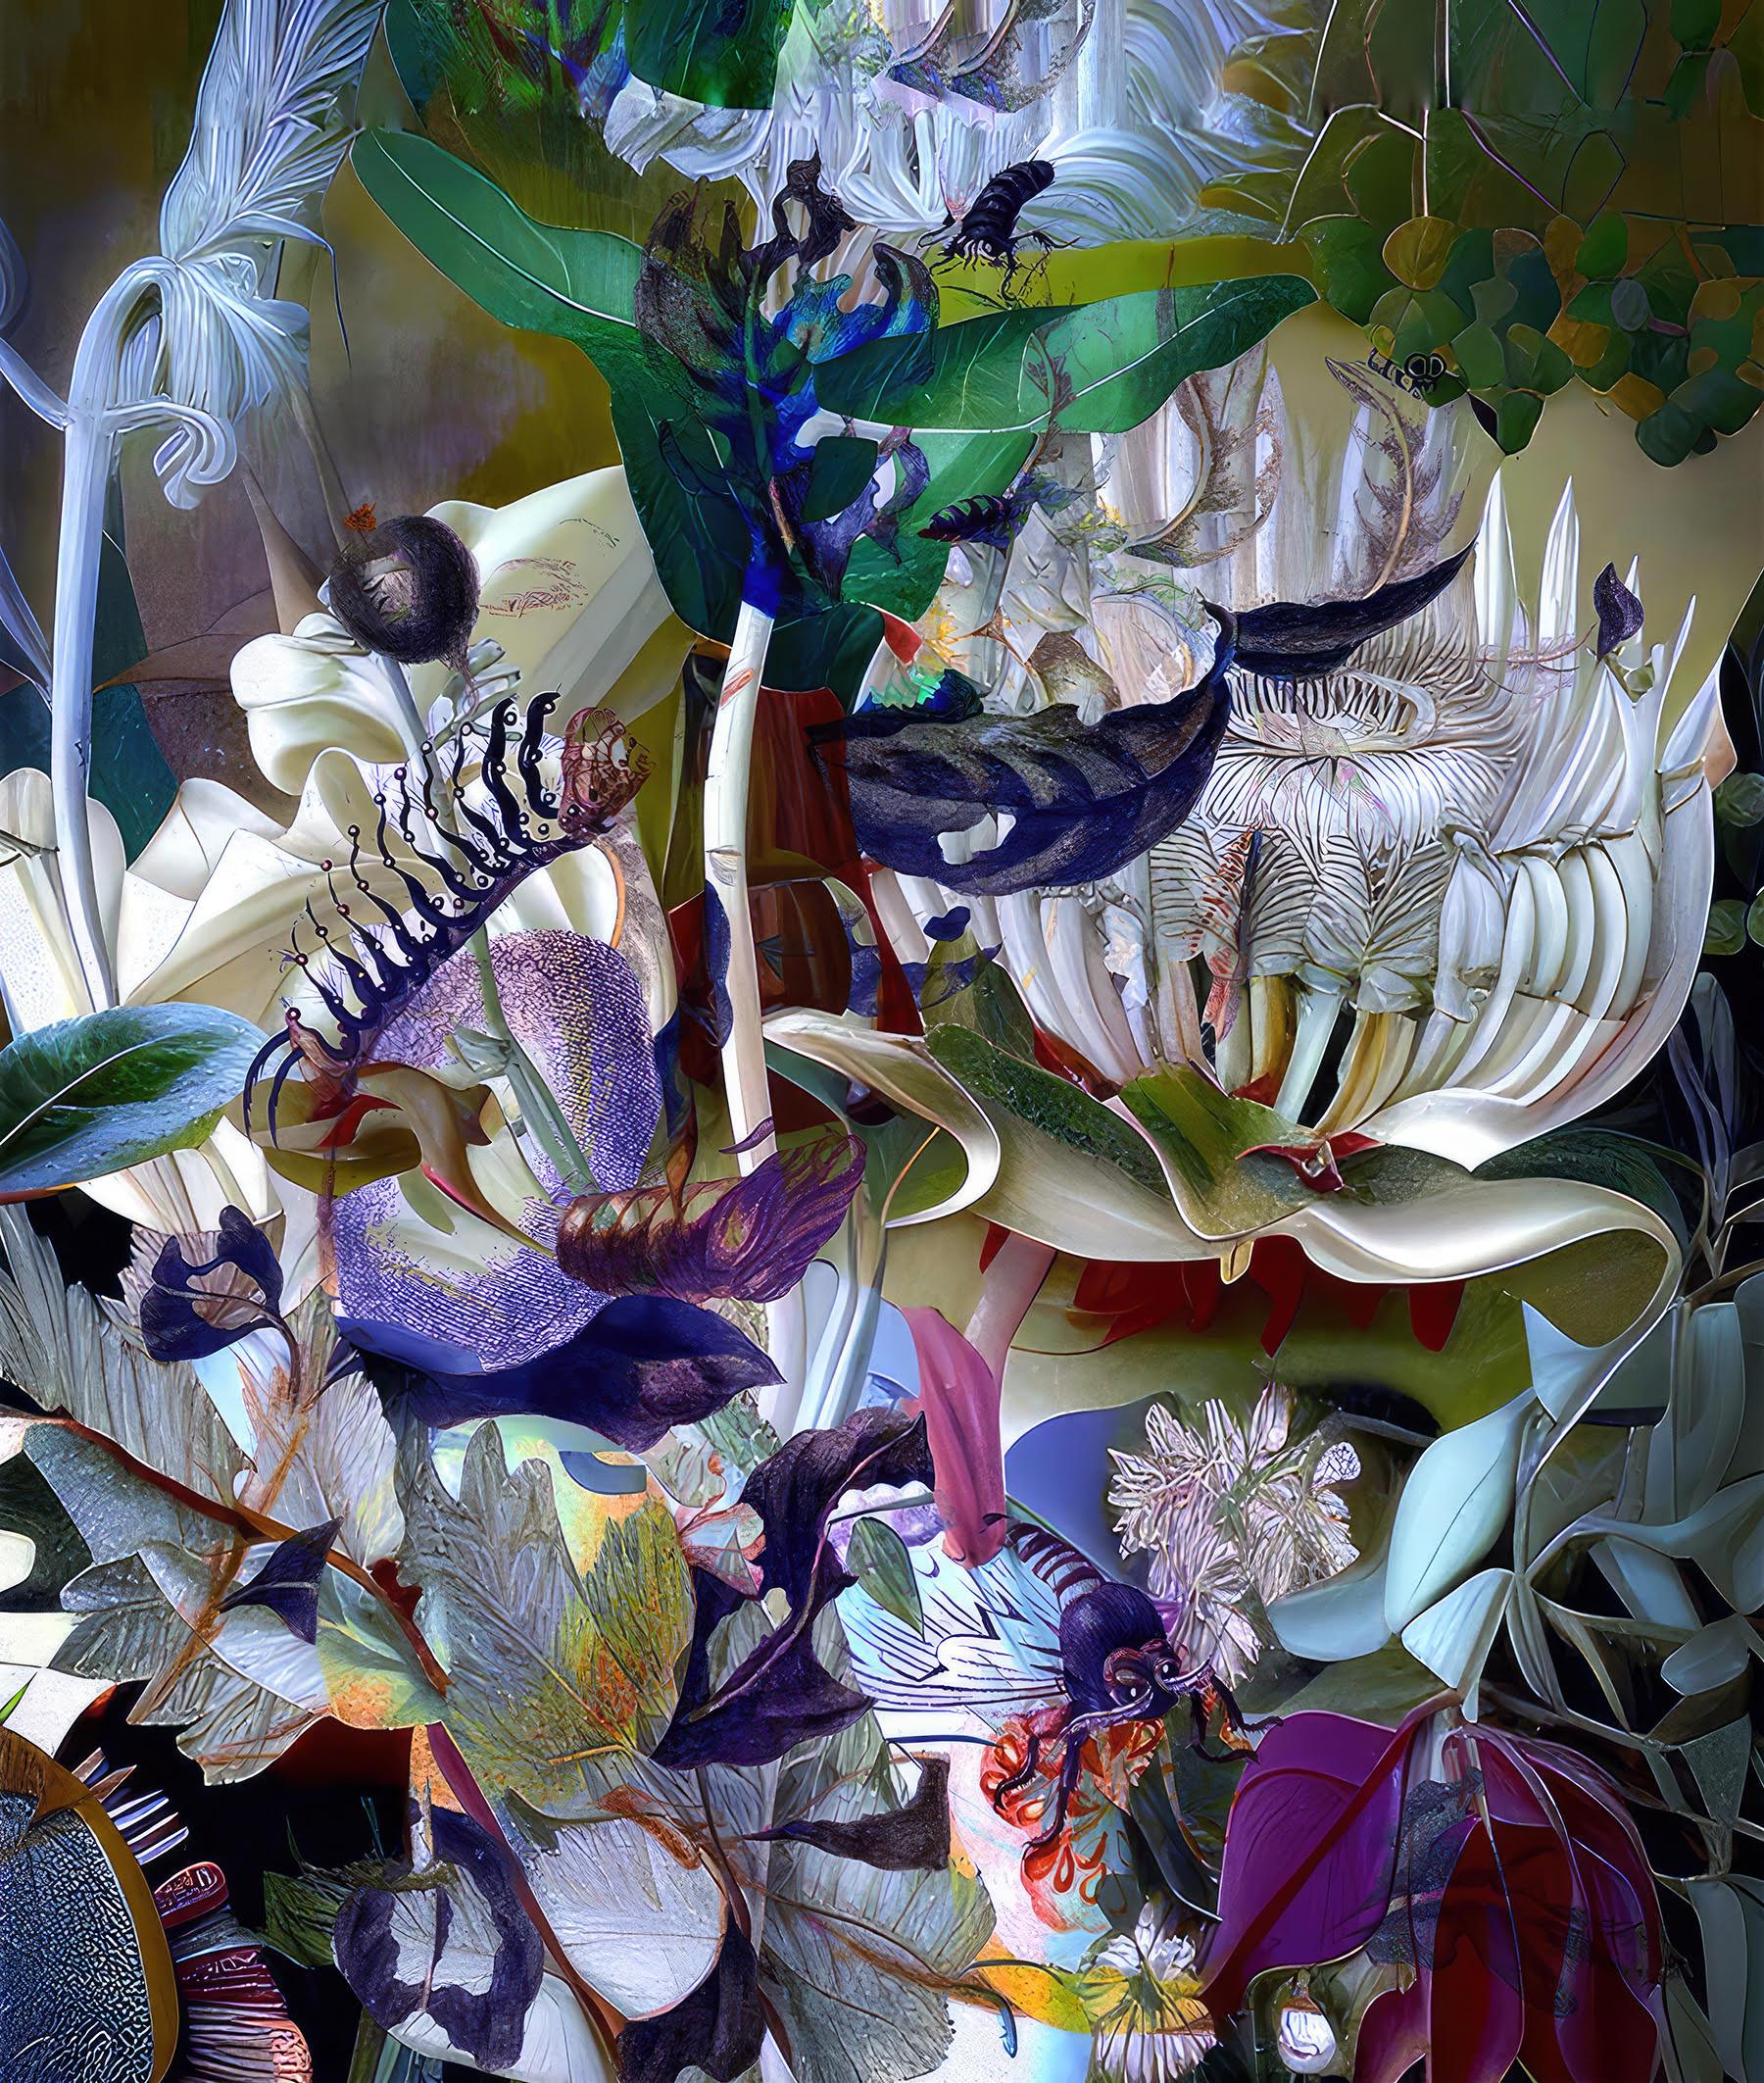 Carol Bouyoucos Still-Life Photograph - Colorful, Landscape Photomontage, Archival Print 'The Garden Sings'